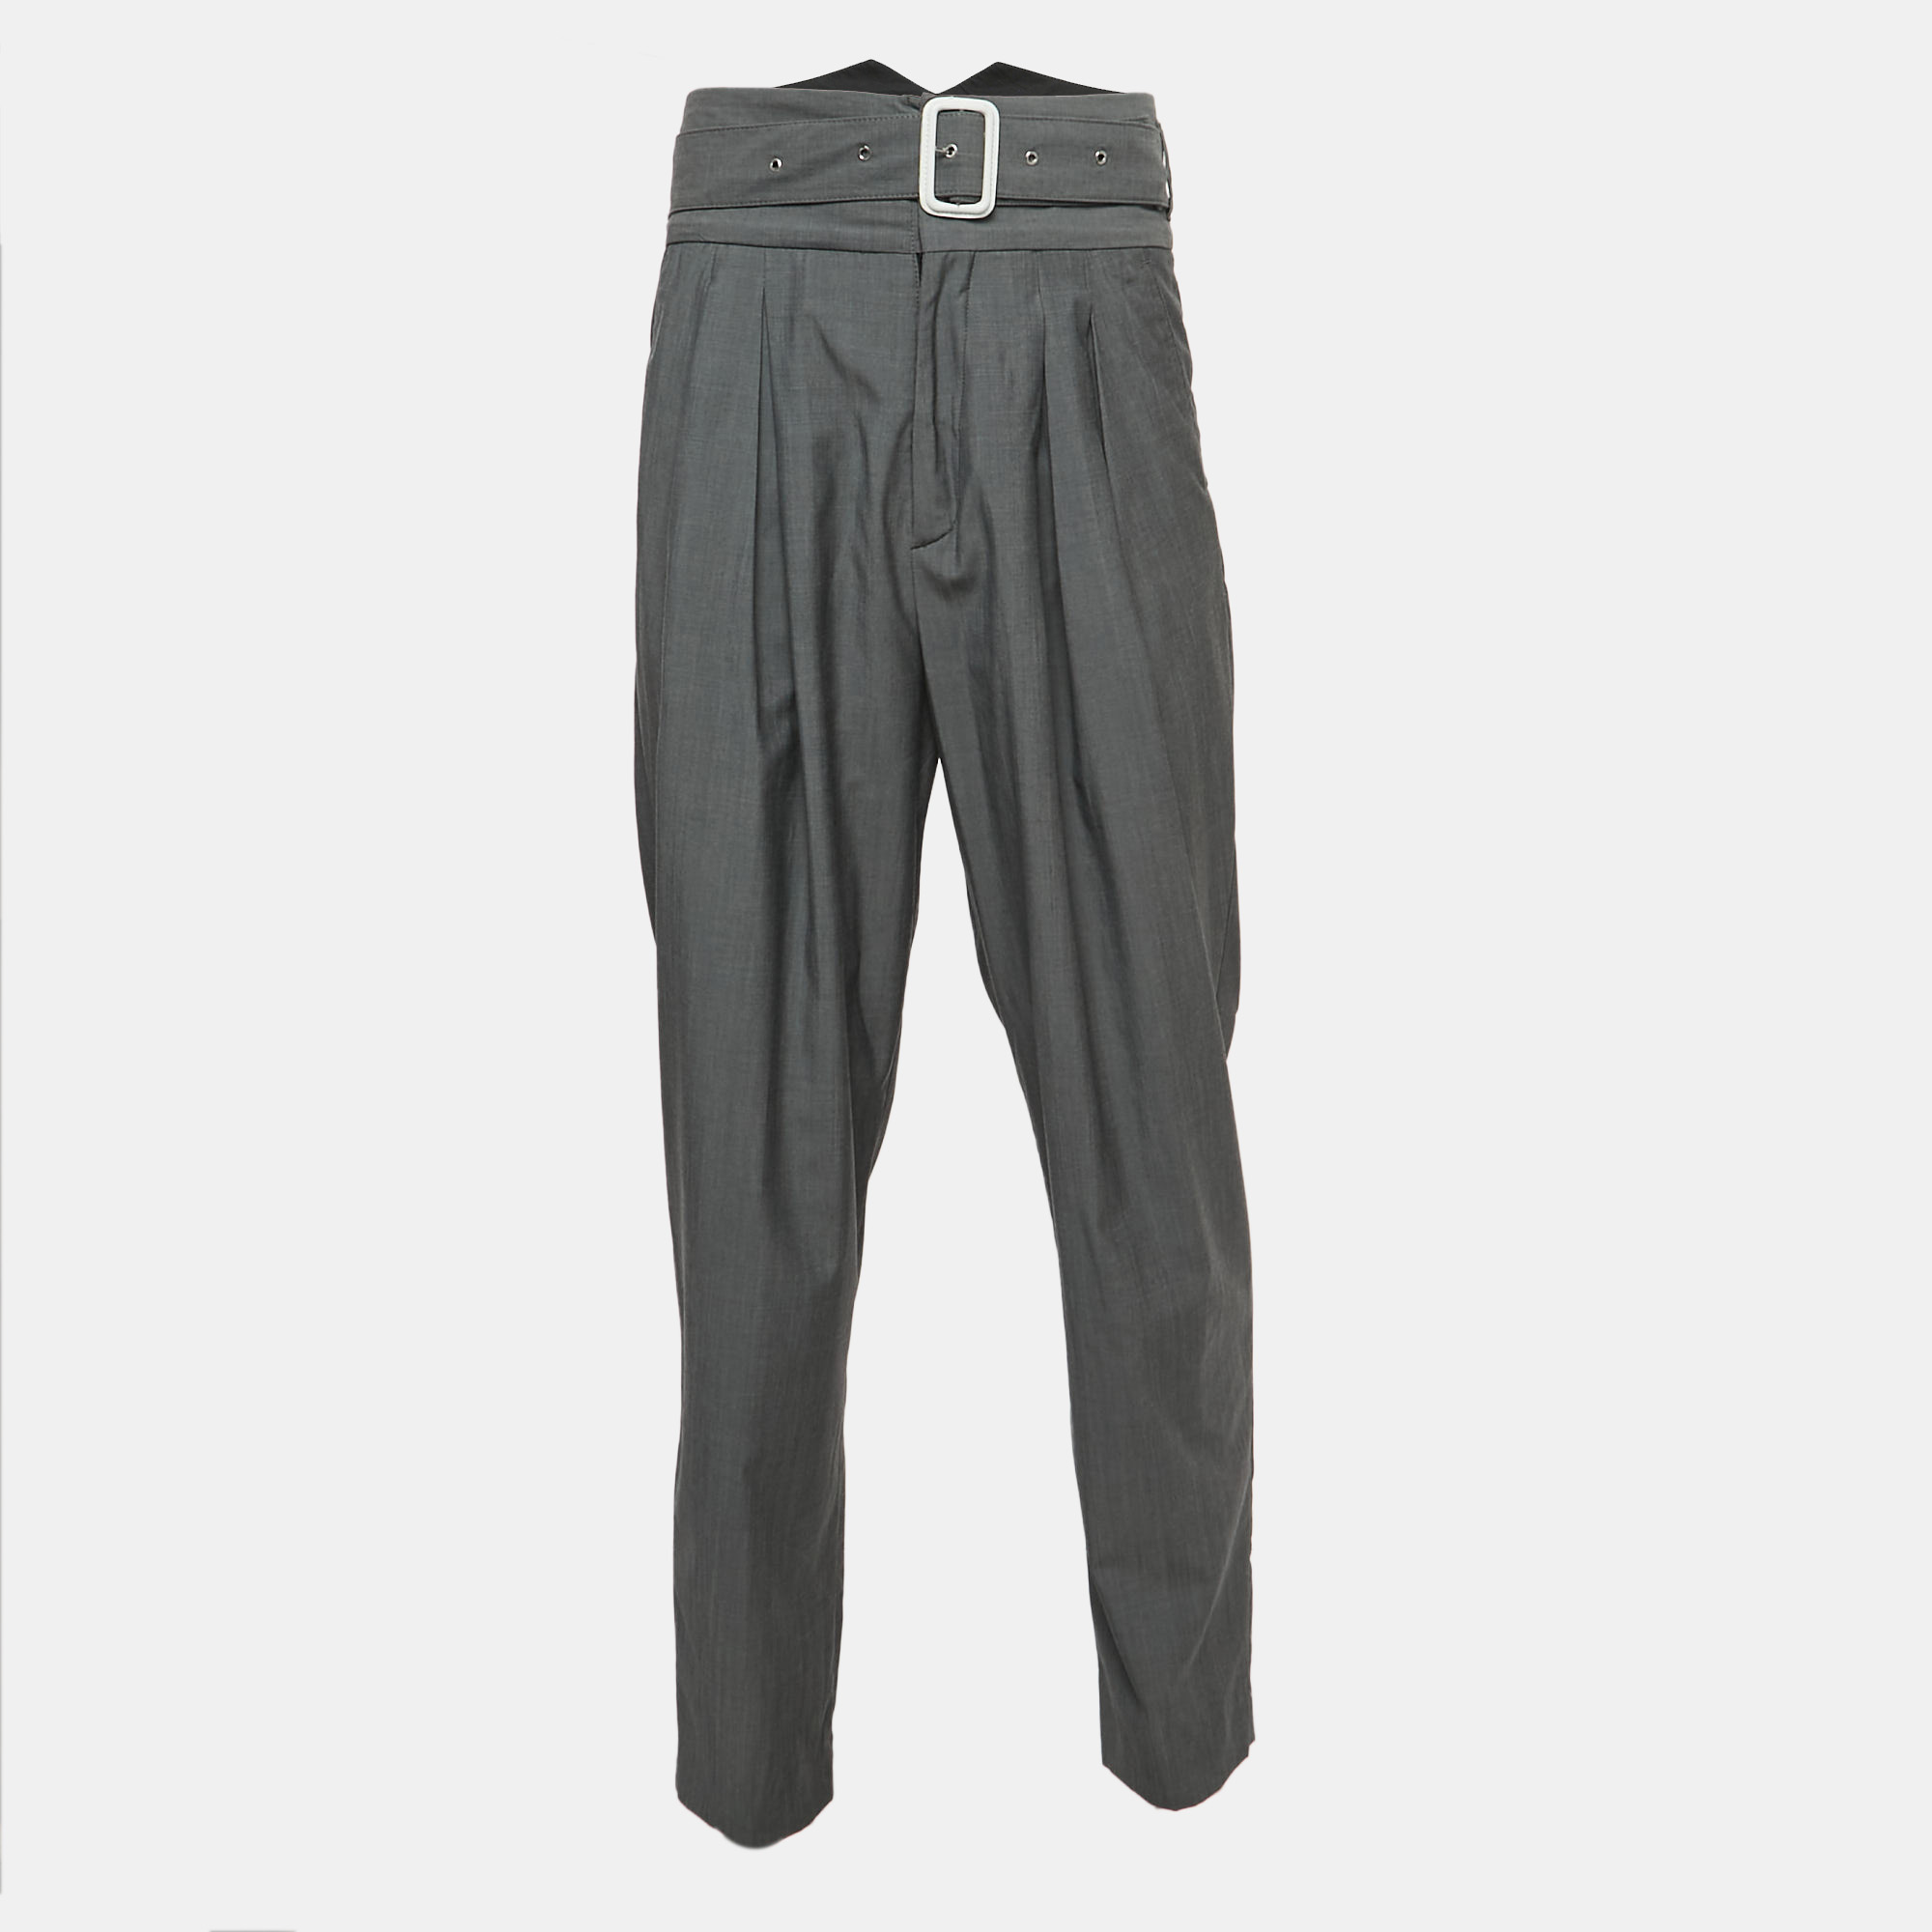 Kenzo Grey Wool Pleated High Waist Belted Trousers L